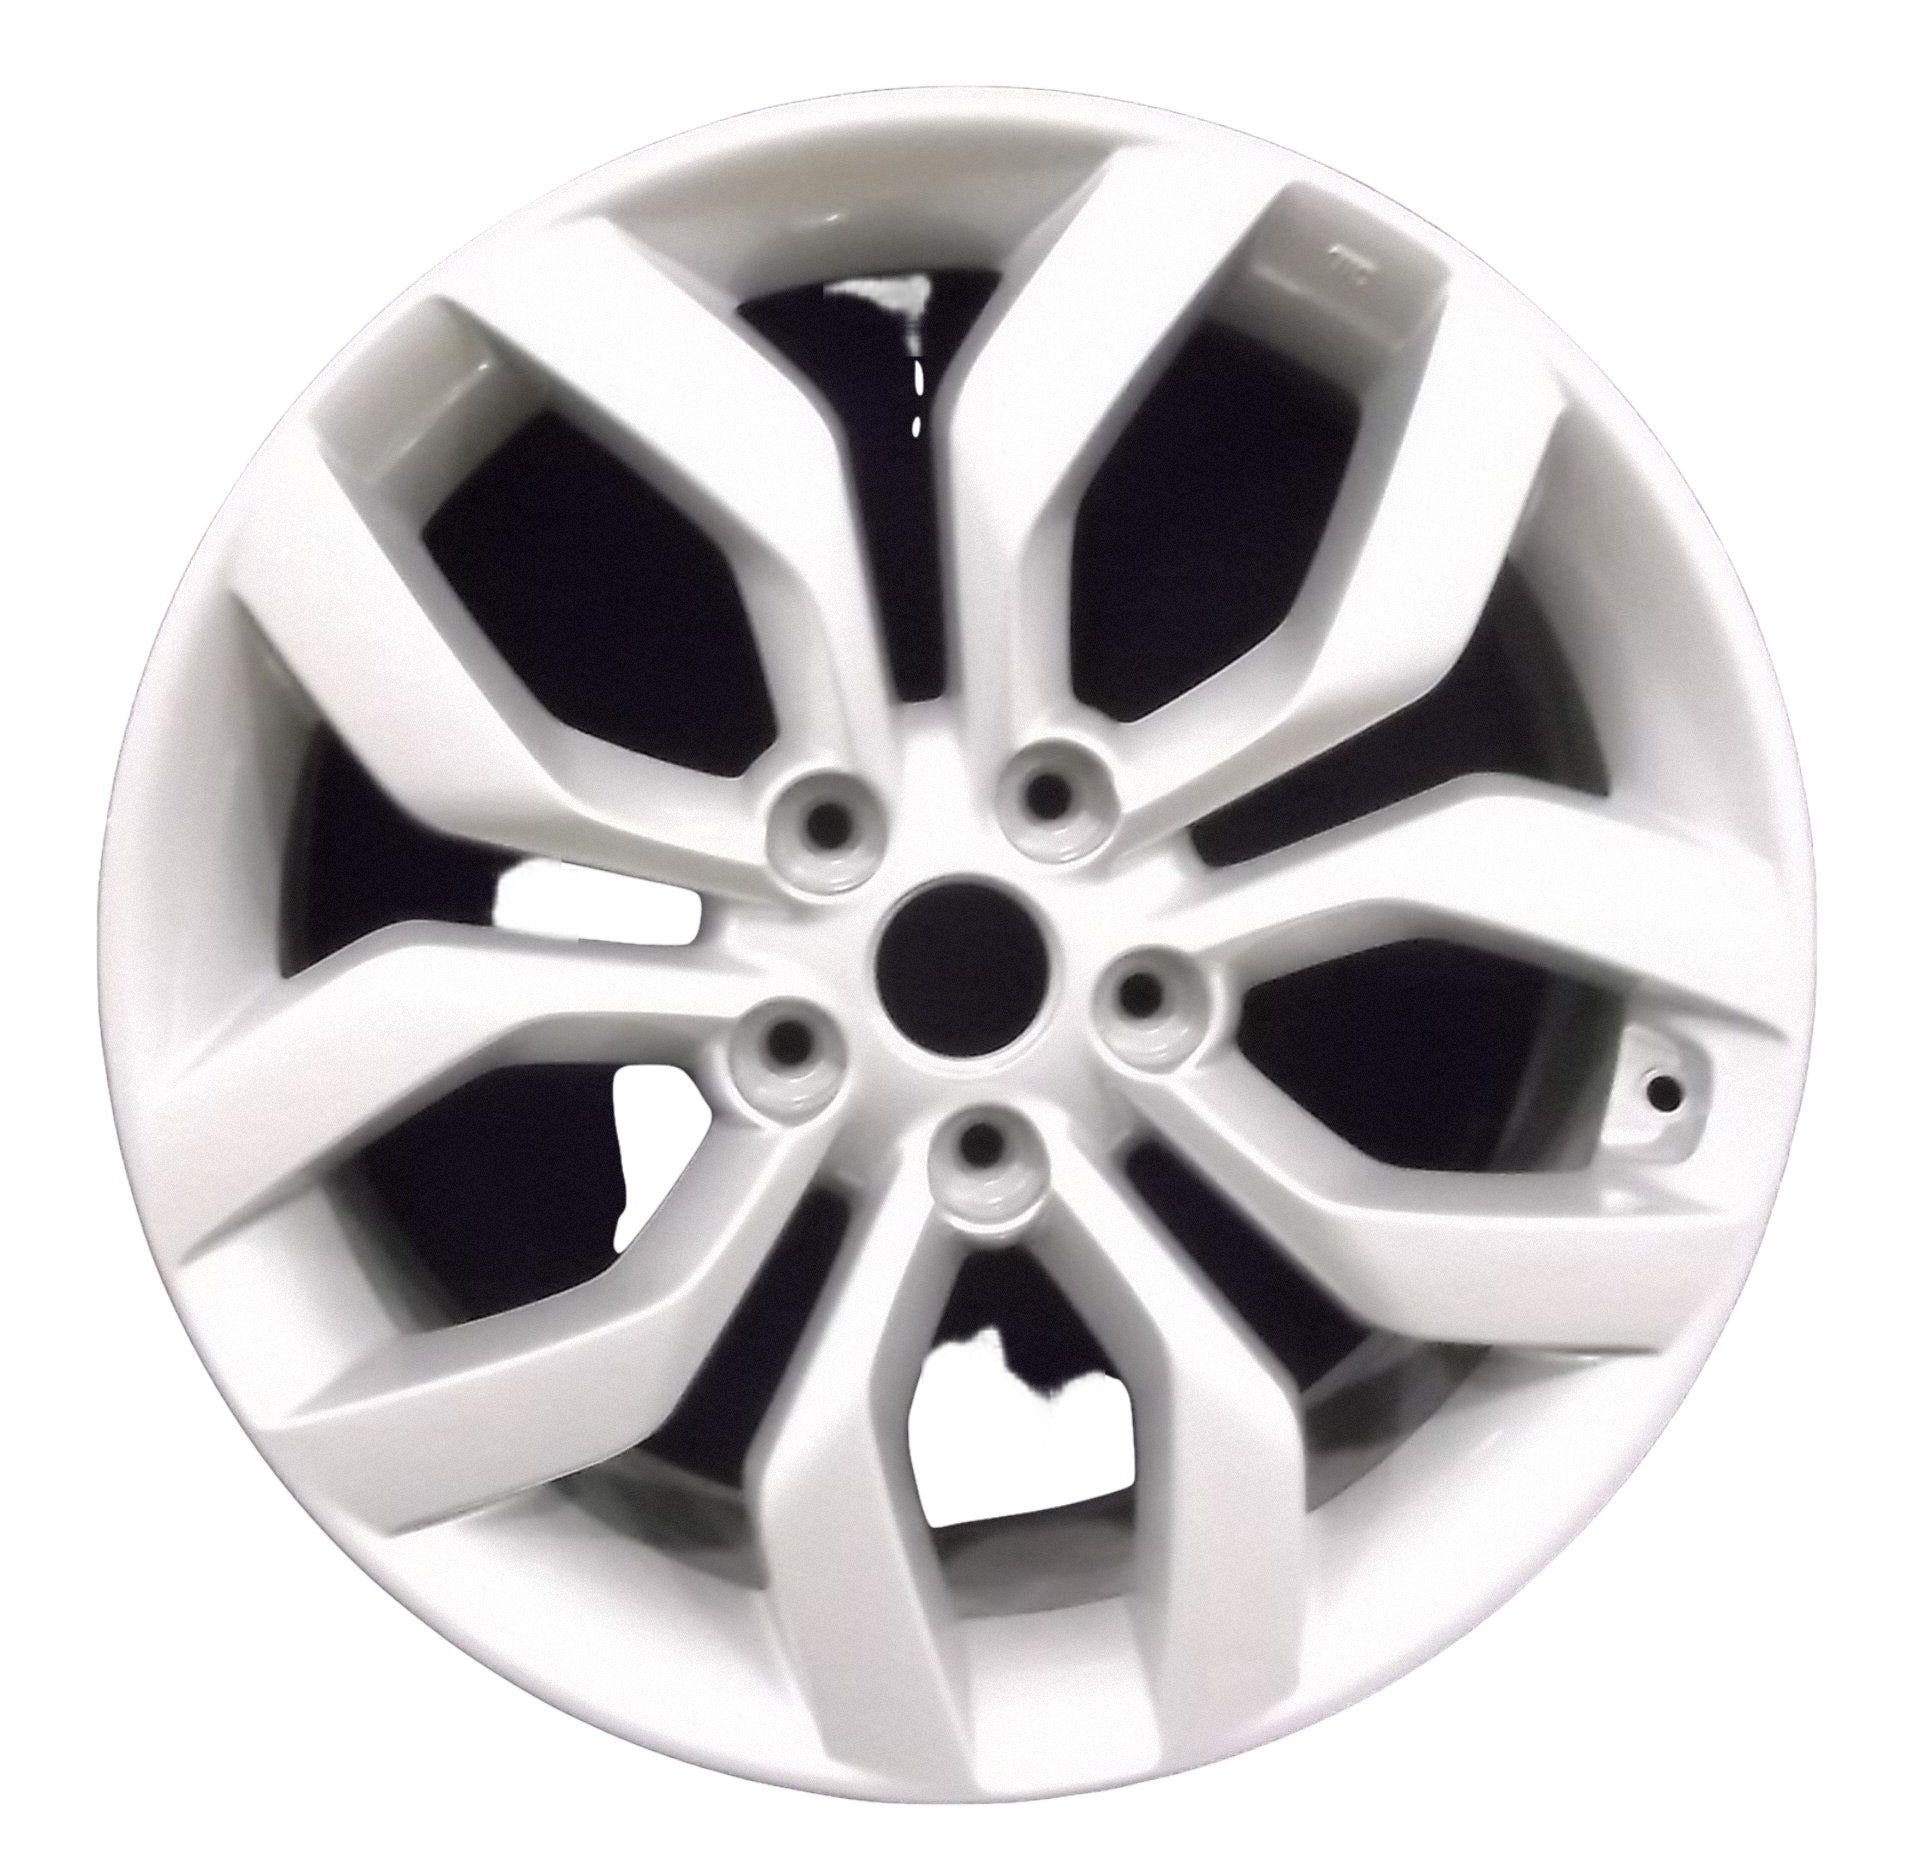 Hyundai Veloster  2011, 2012, 2013, 2014, 2015 Factory OEM Car Wheel Size 18x7.5 Alloy WAO.70814.PS14.FF